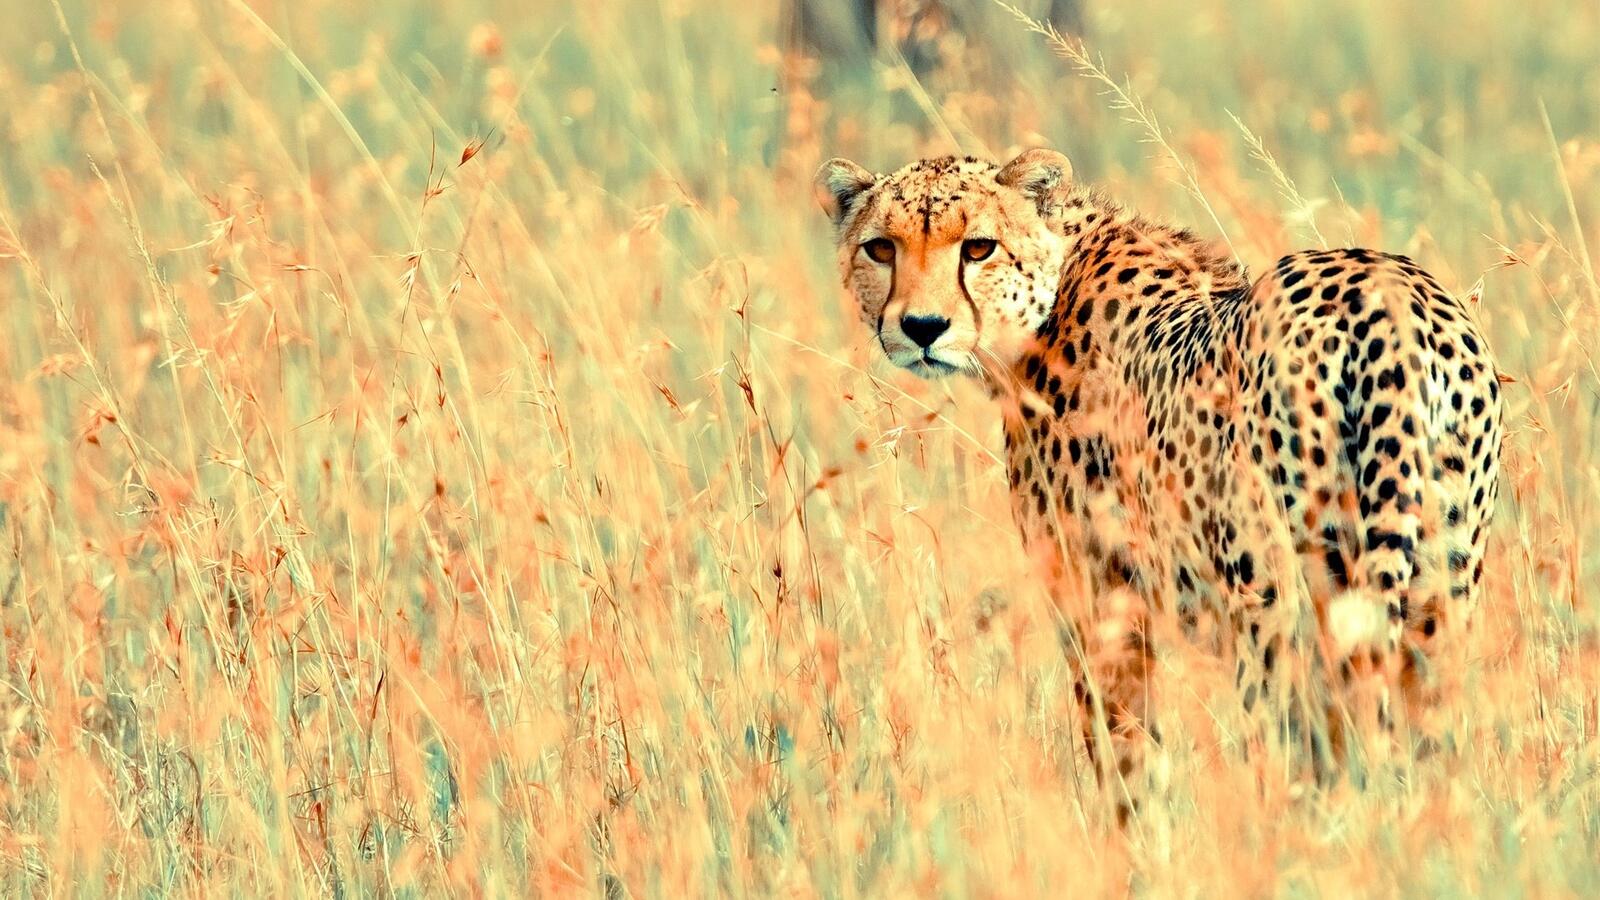 Free photo A cheetah in the field looks back at the photographer